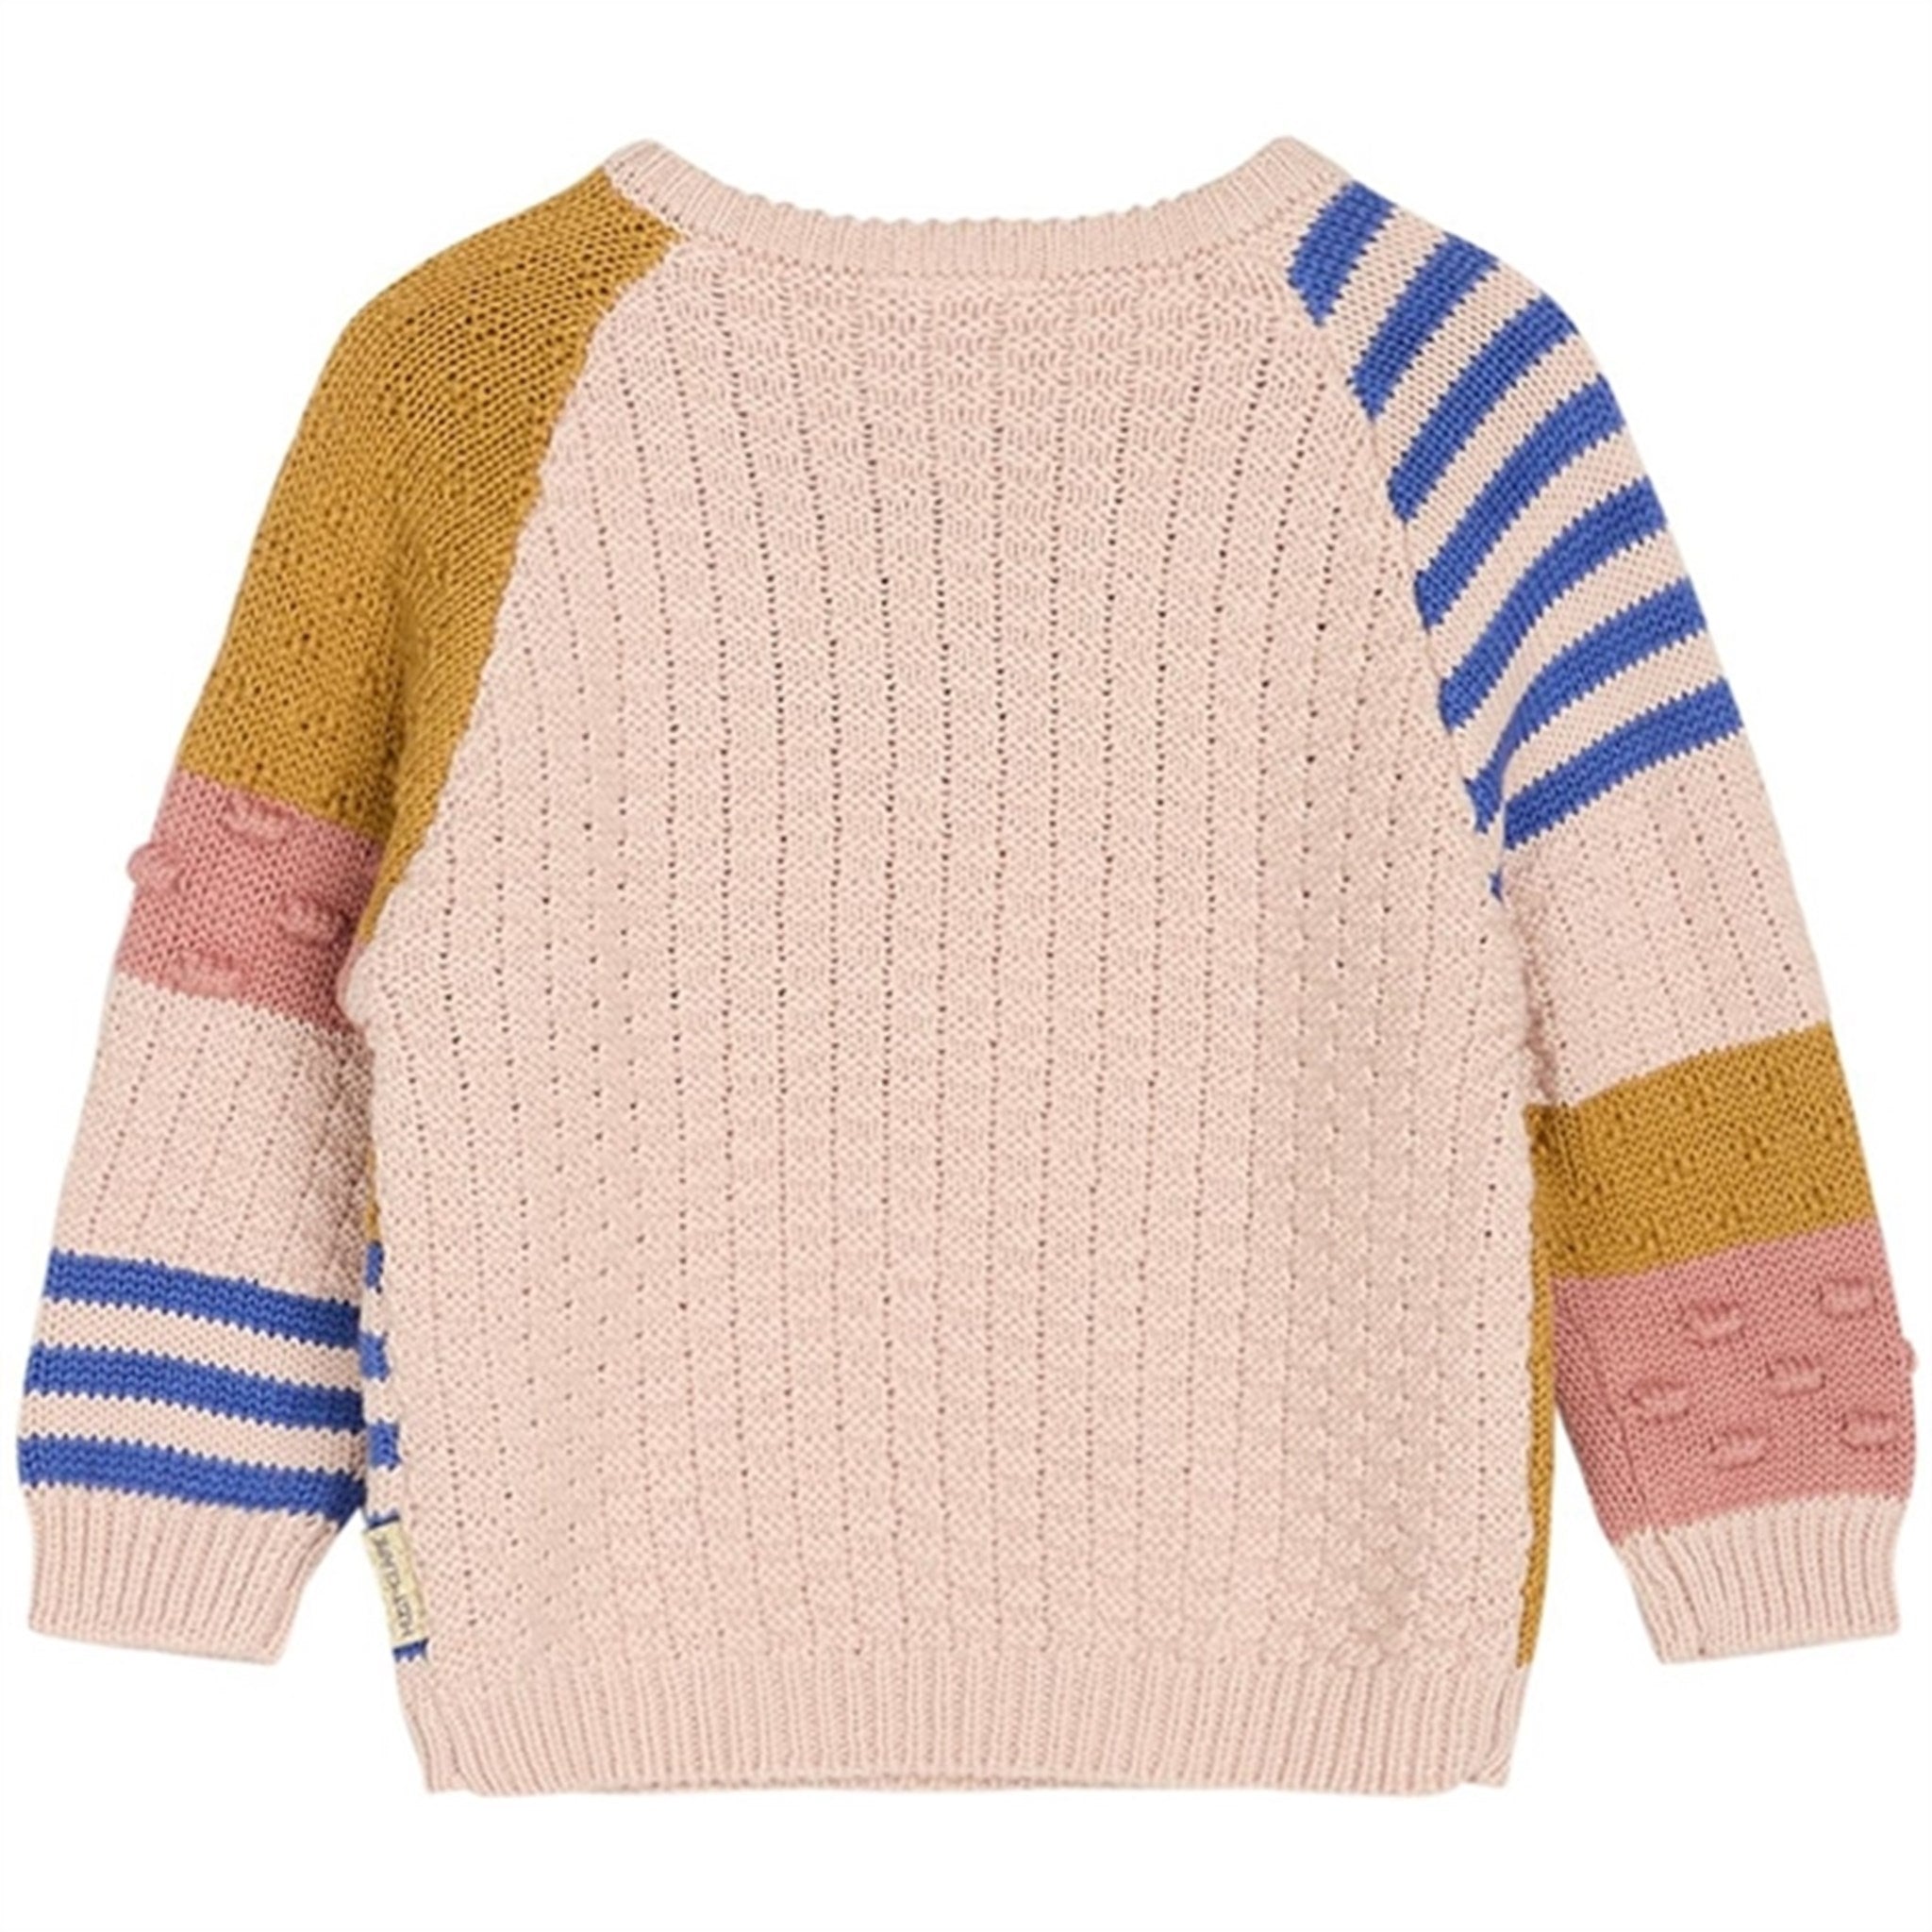 Hust & Claire Baby Peach Dust Nadiina Knit Sweater 2